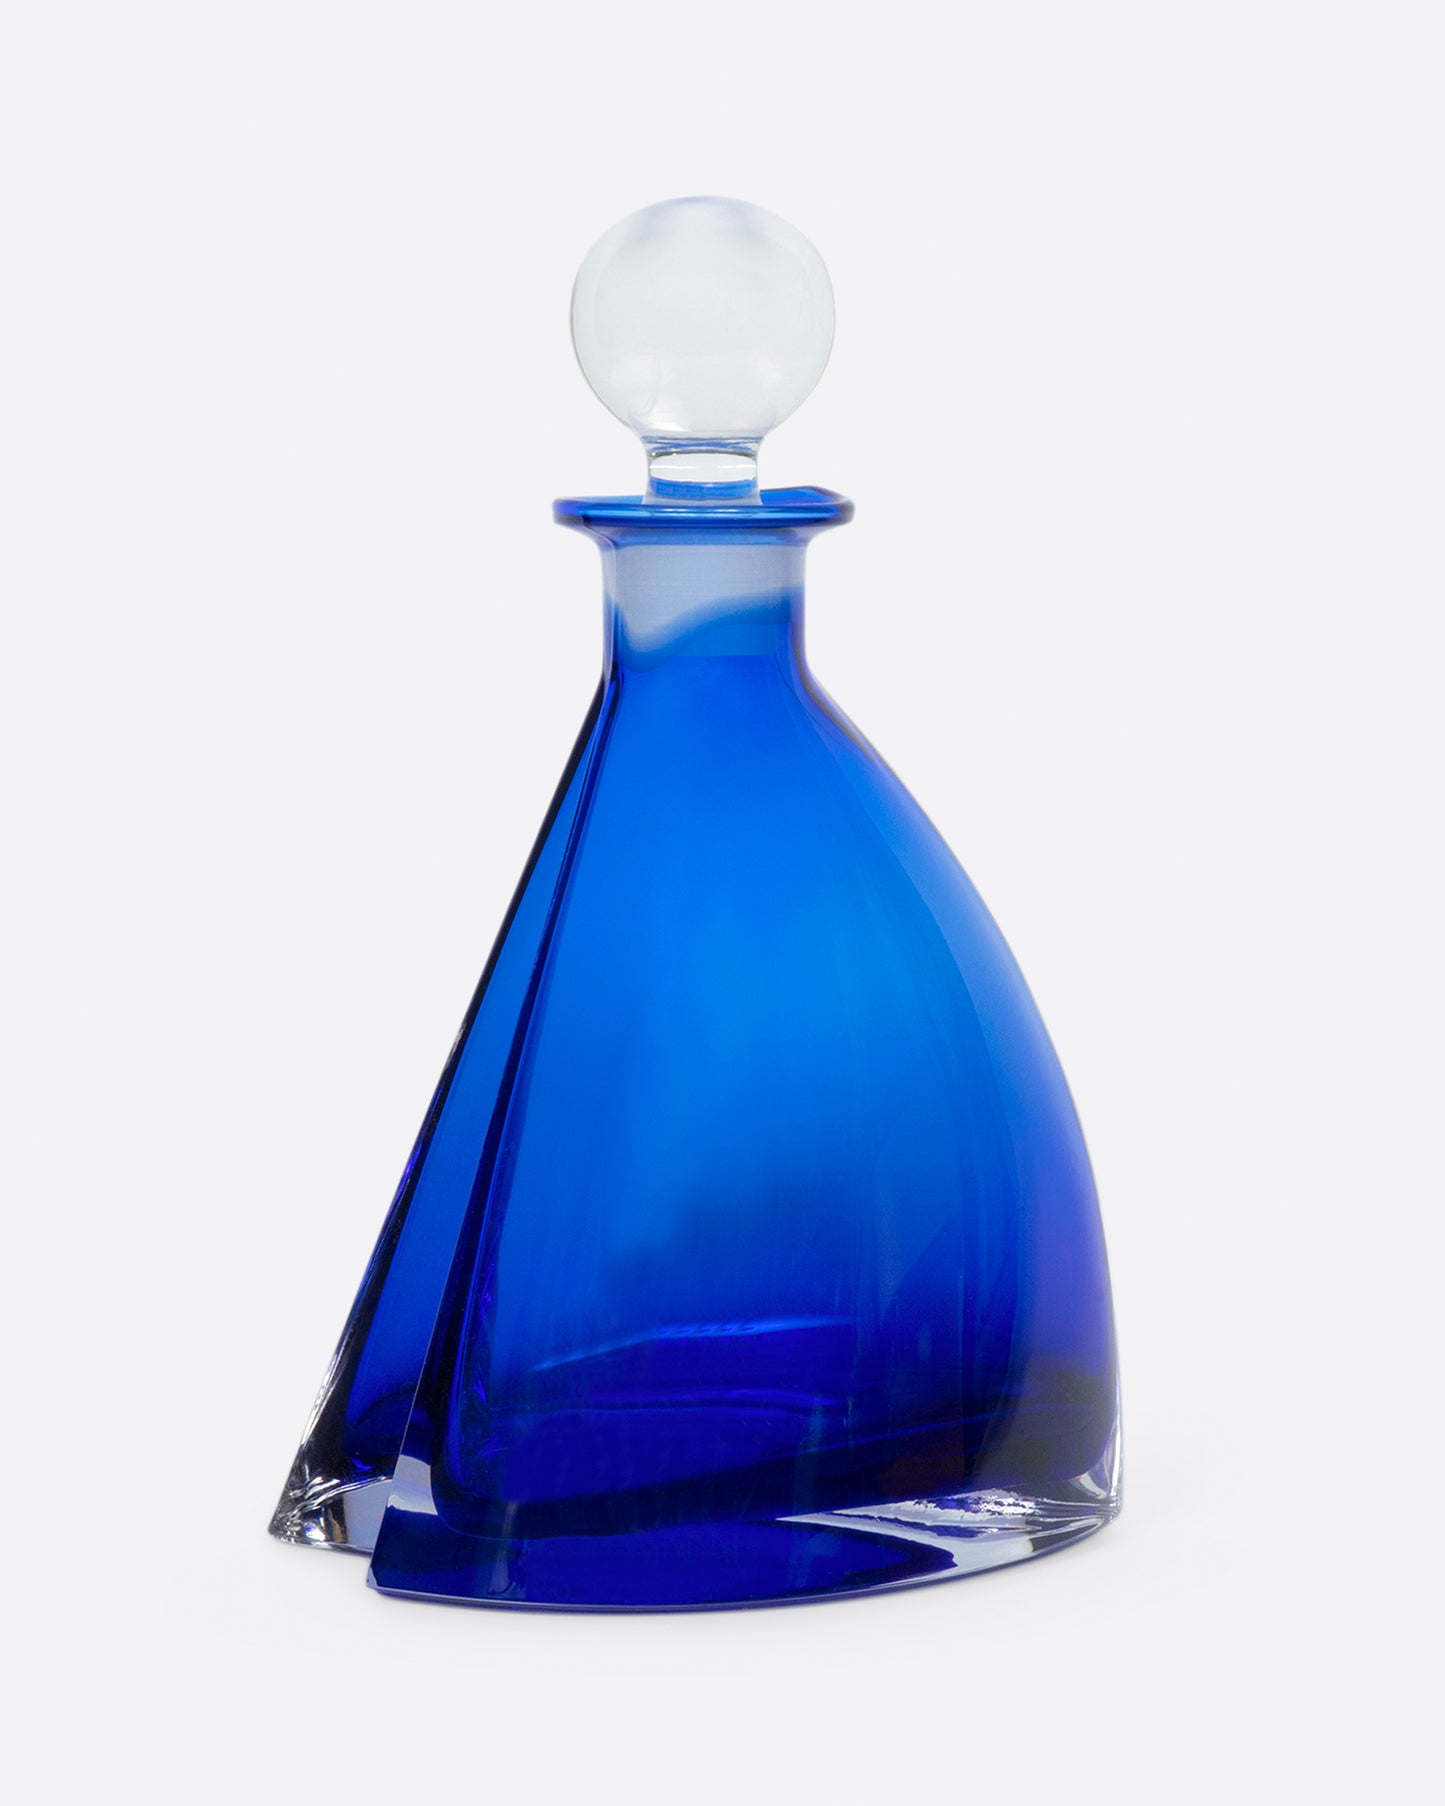 This heavy, heart-shaped bottle looks different from every angle.